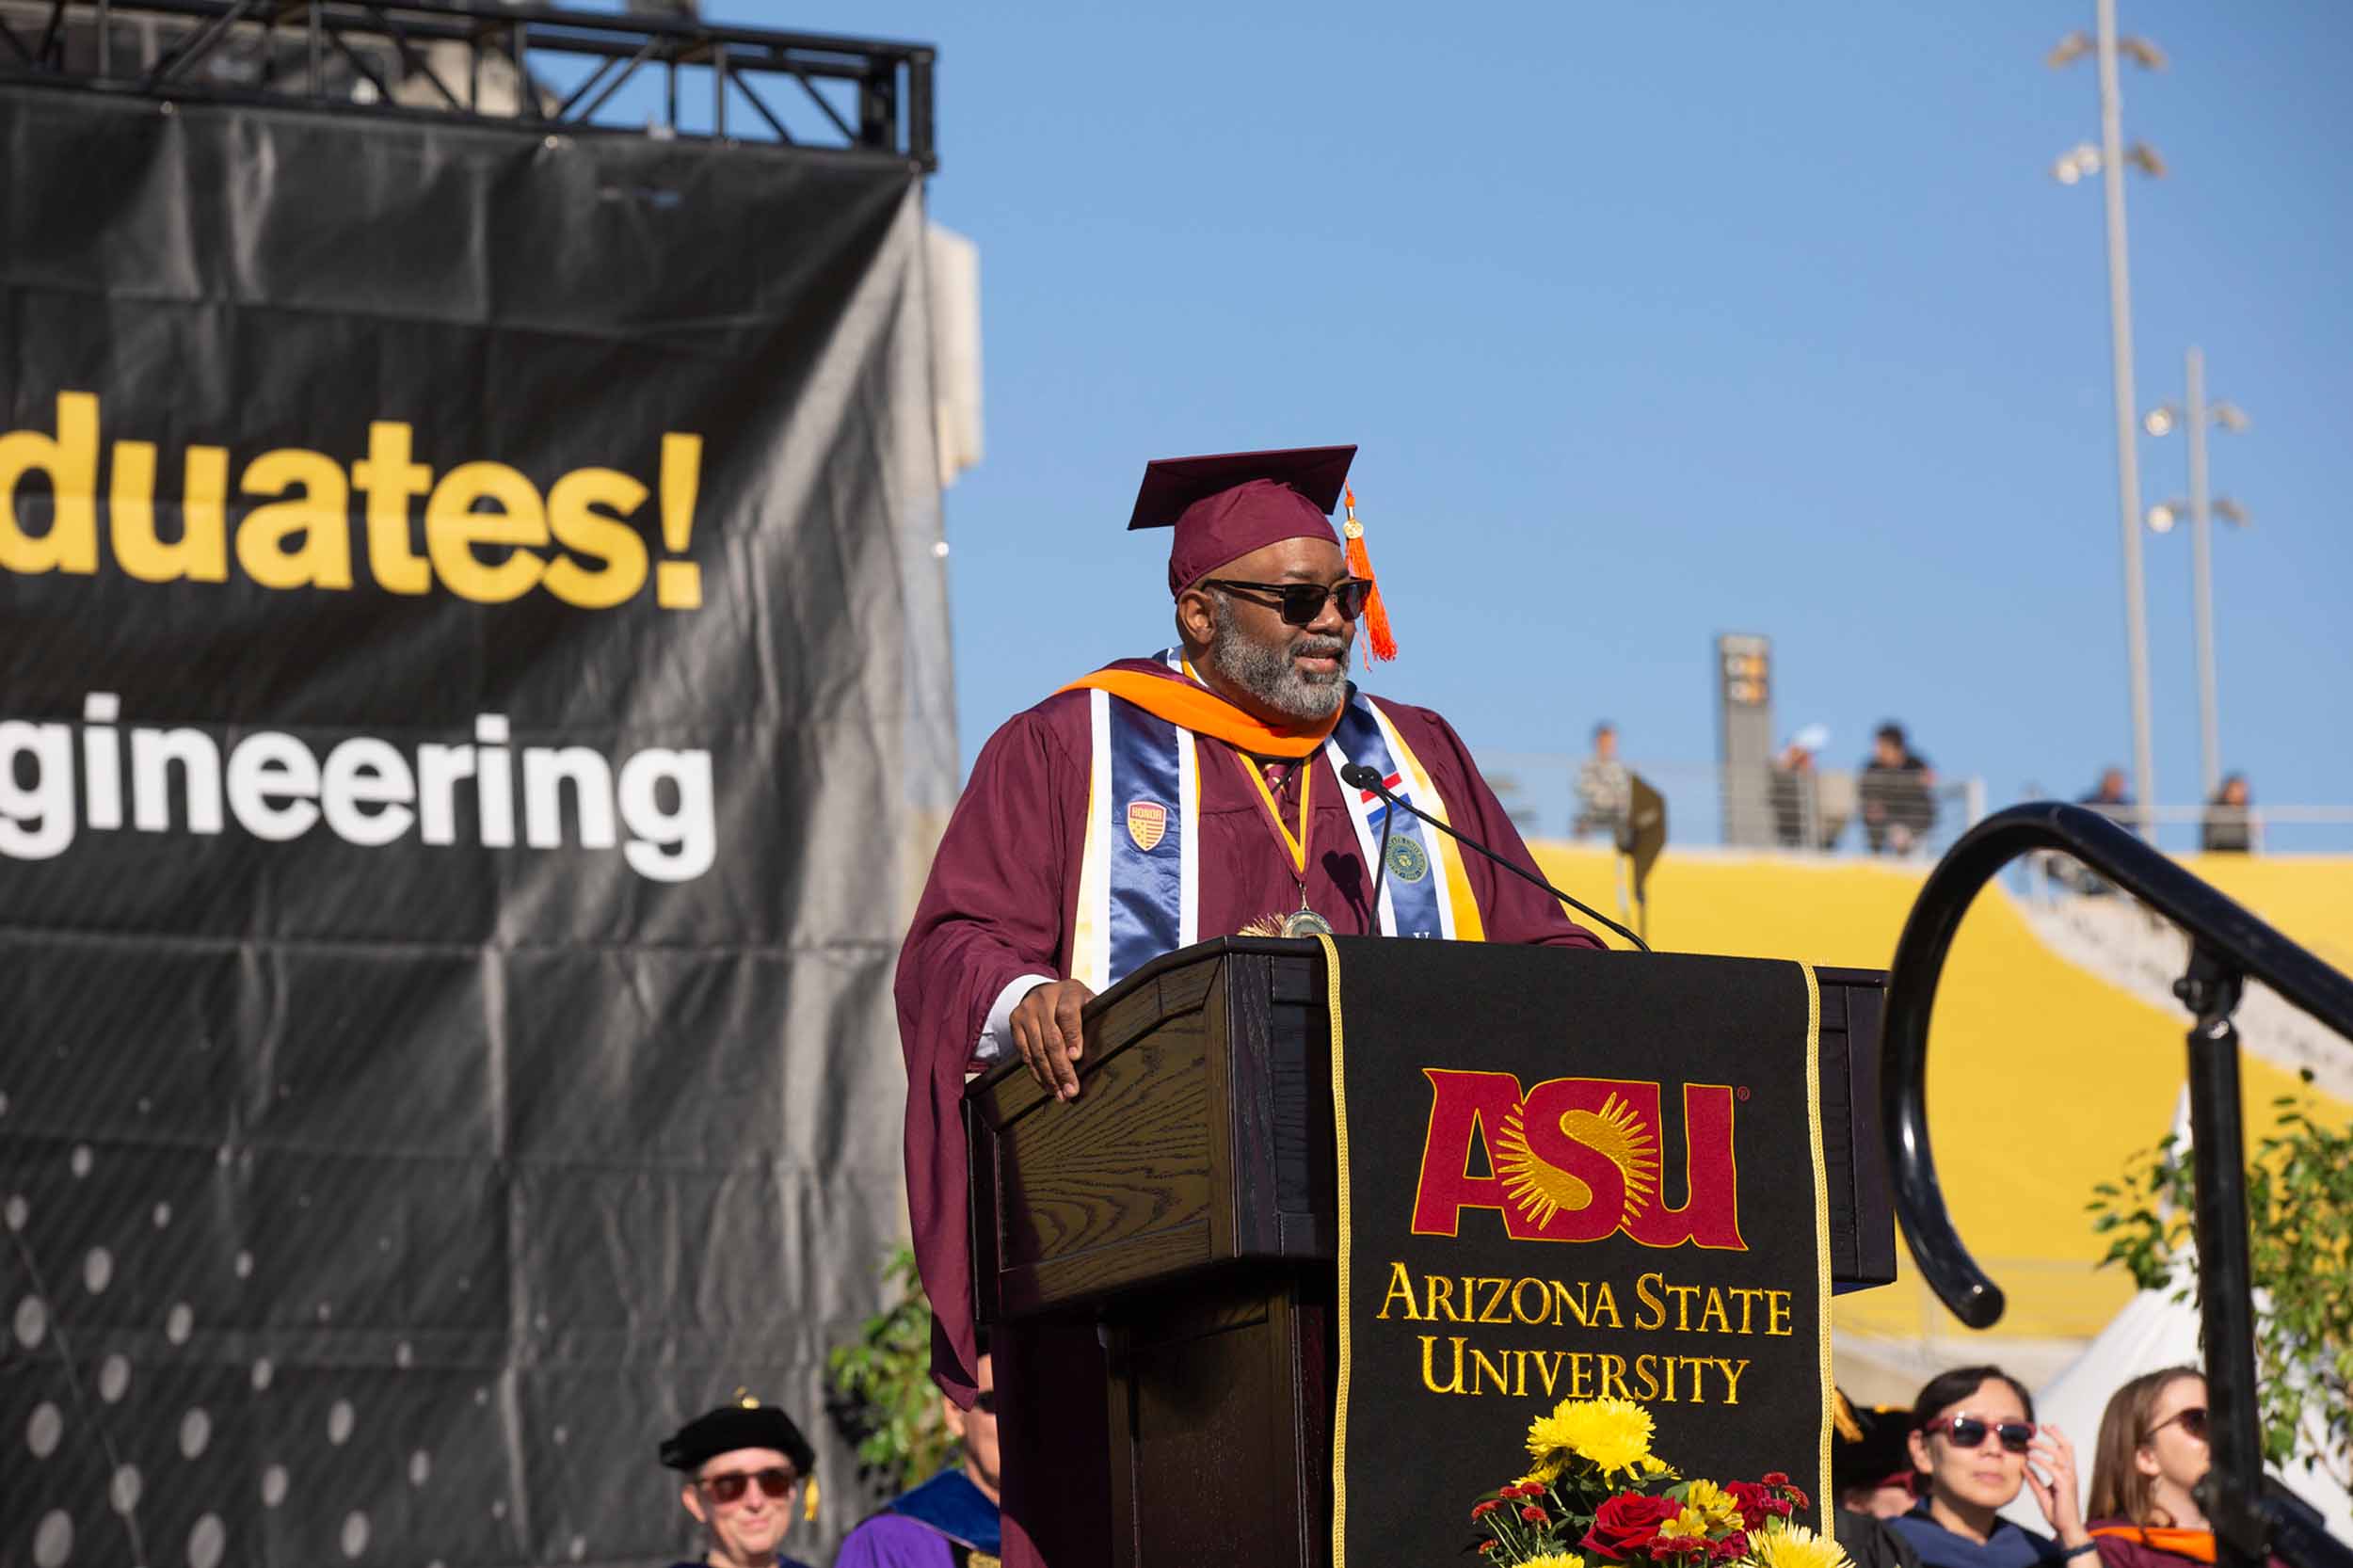 Melvin "Mitch" Gatewood, the Fall 2022 ASU Engineering Convocation speaker, stands at the podium delivering his message in Sun Devil Stadium.